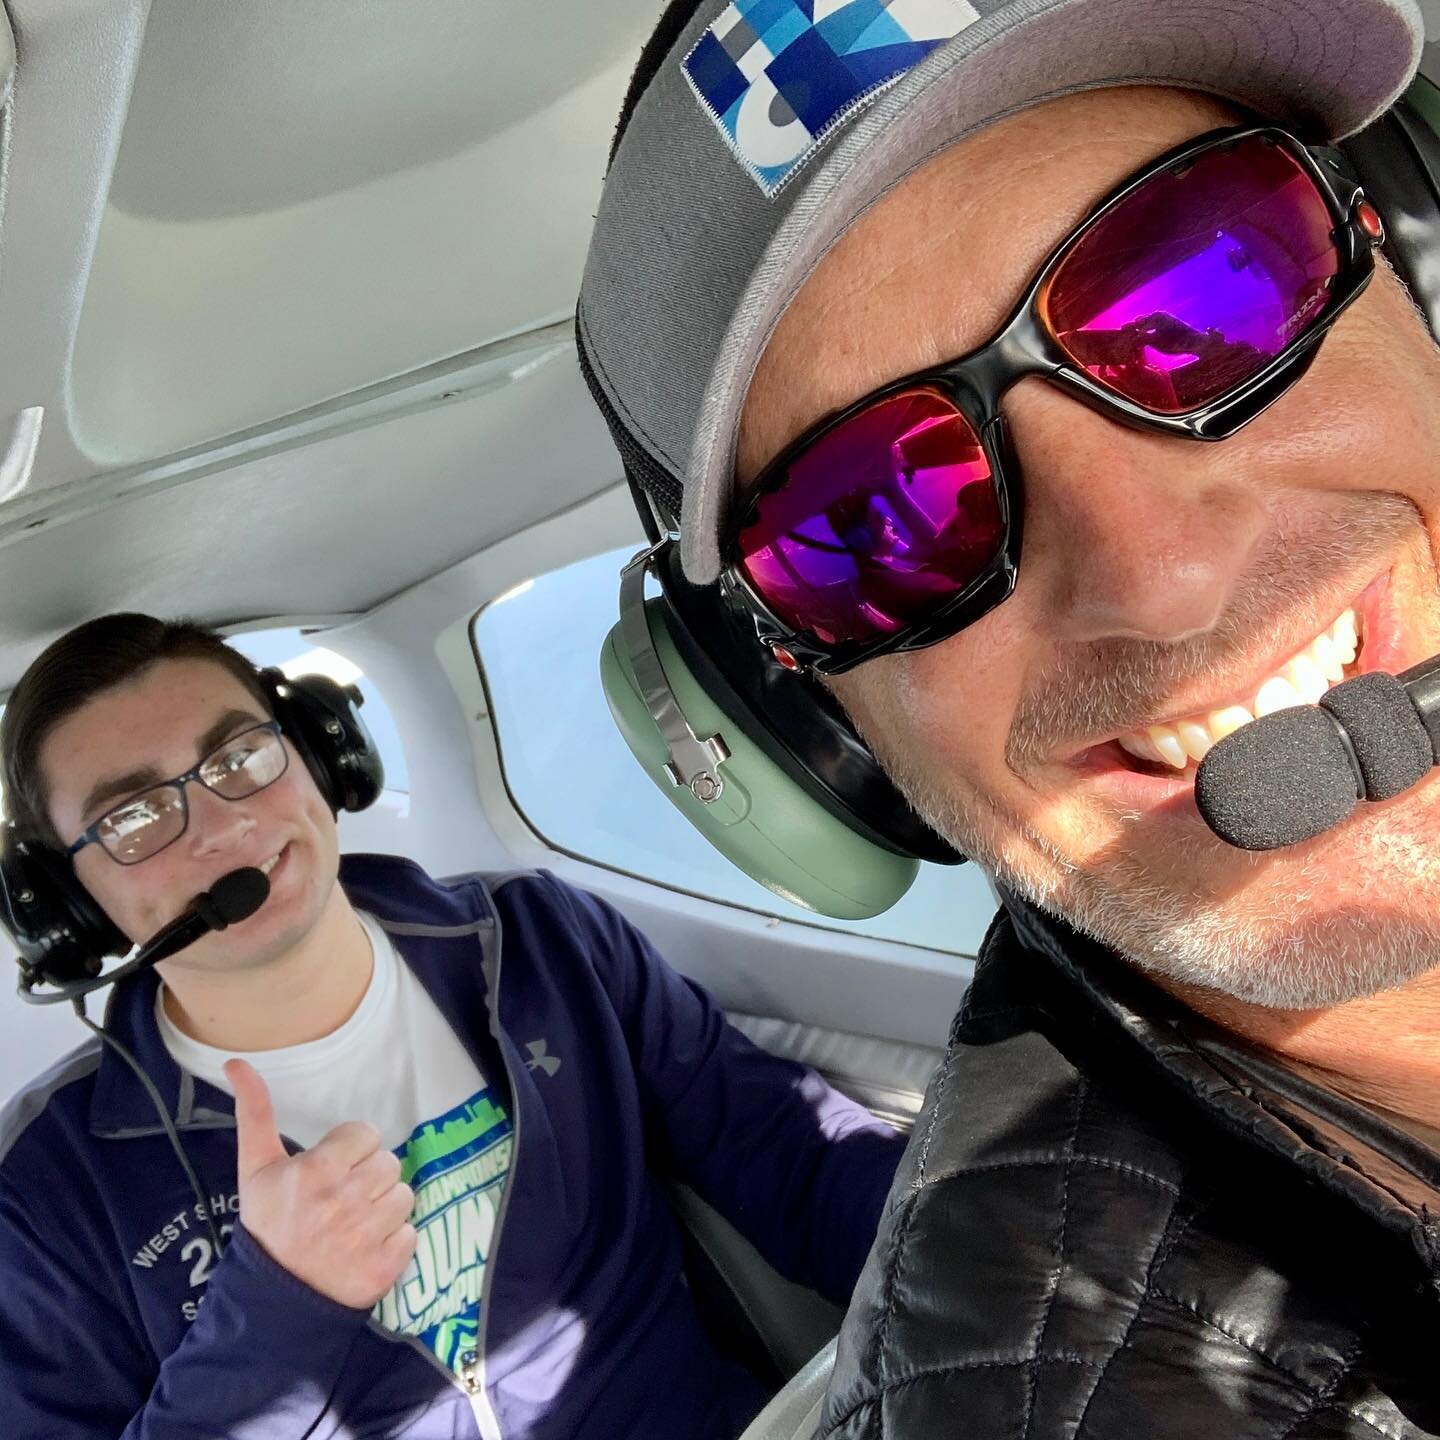 ✈️🛩 Had a blast taking Lance up for an early Christmas present with Melbourne Flight Training. He did GREAT flying the plane including taking off on his own. 🎄🎅🏻

✄ - - - - - - - - - - - - - - - - - - - - - - - - - - - - - - - 

#family #familyti